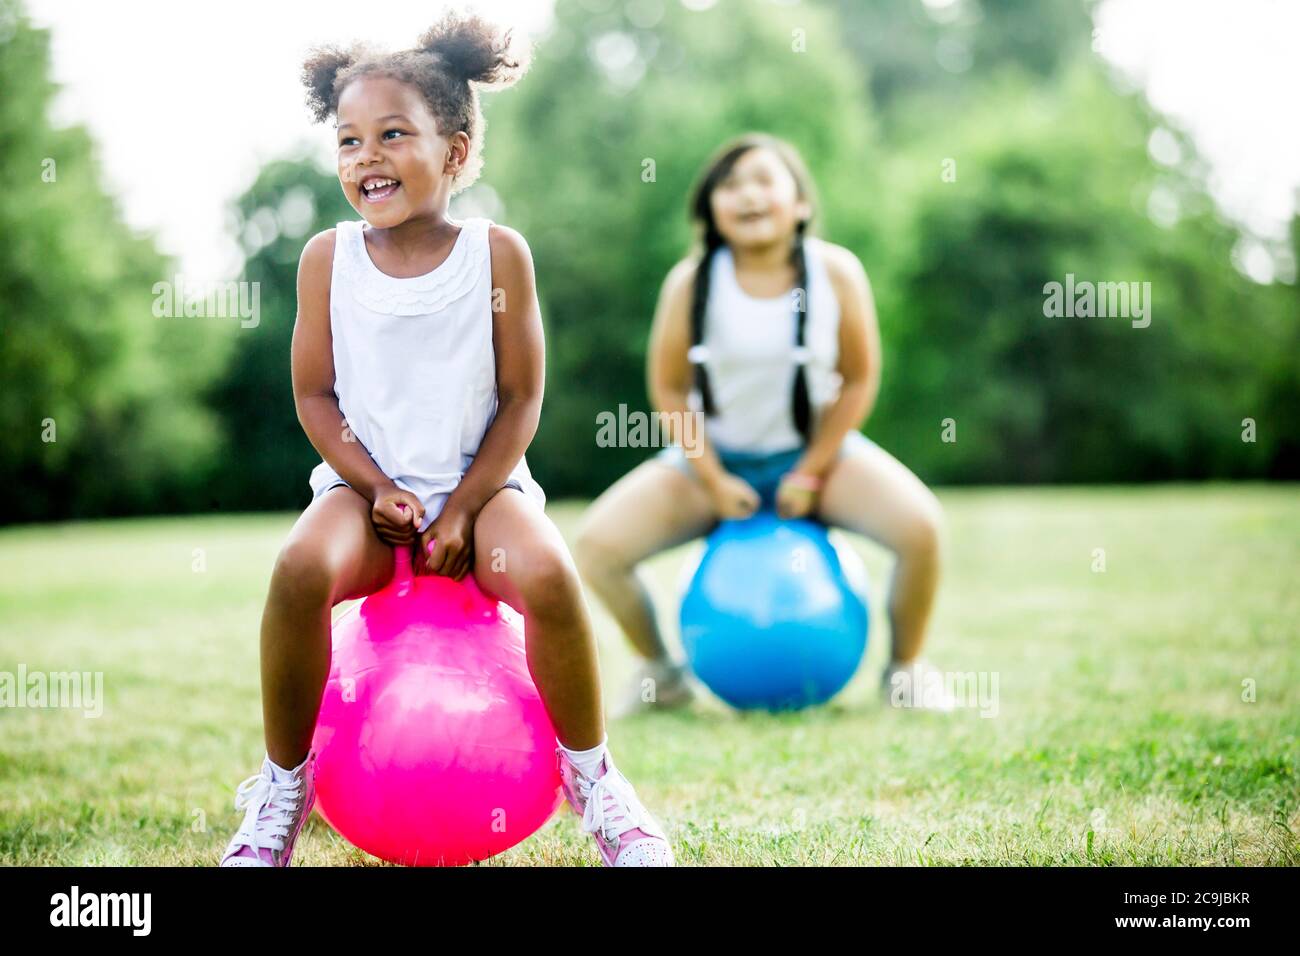 Girls bouncing on inflatable hopper in park, laughing. Stock Photo